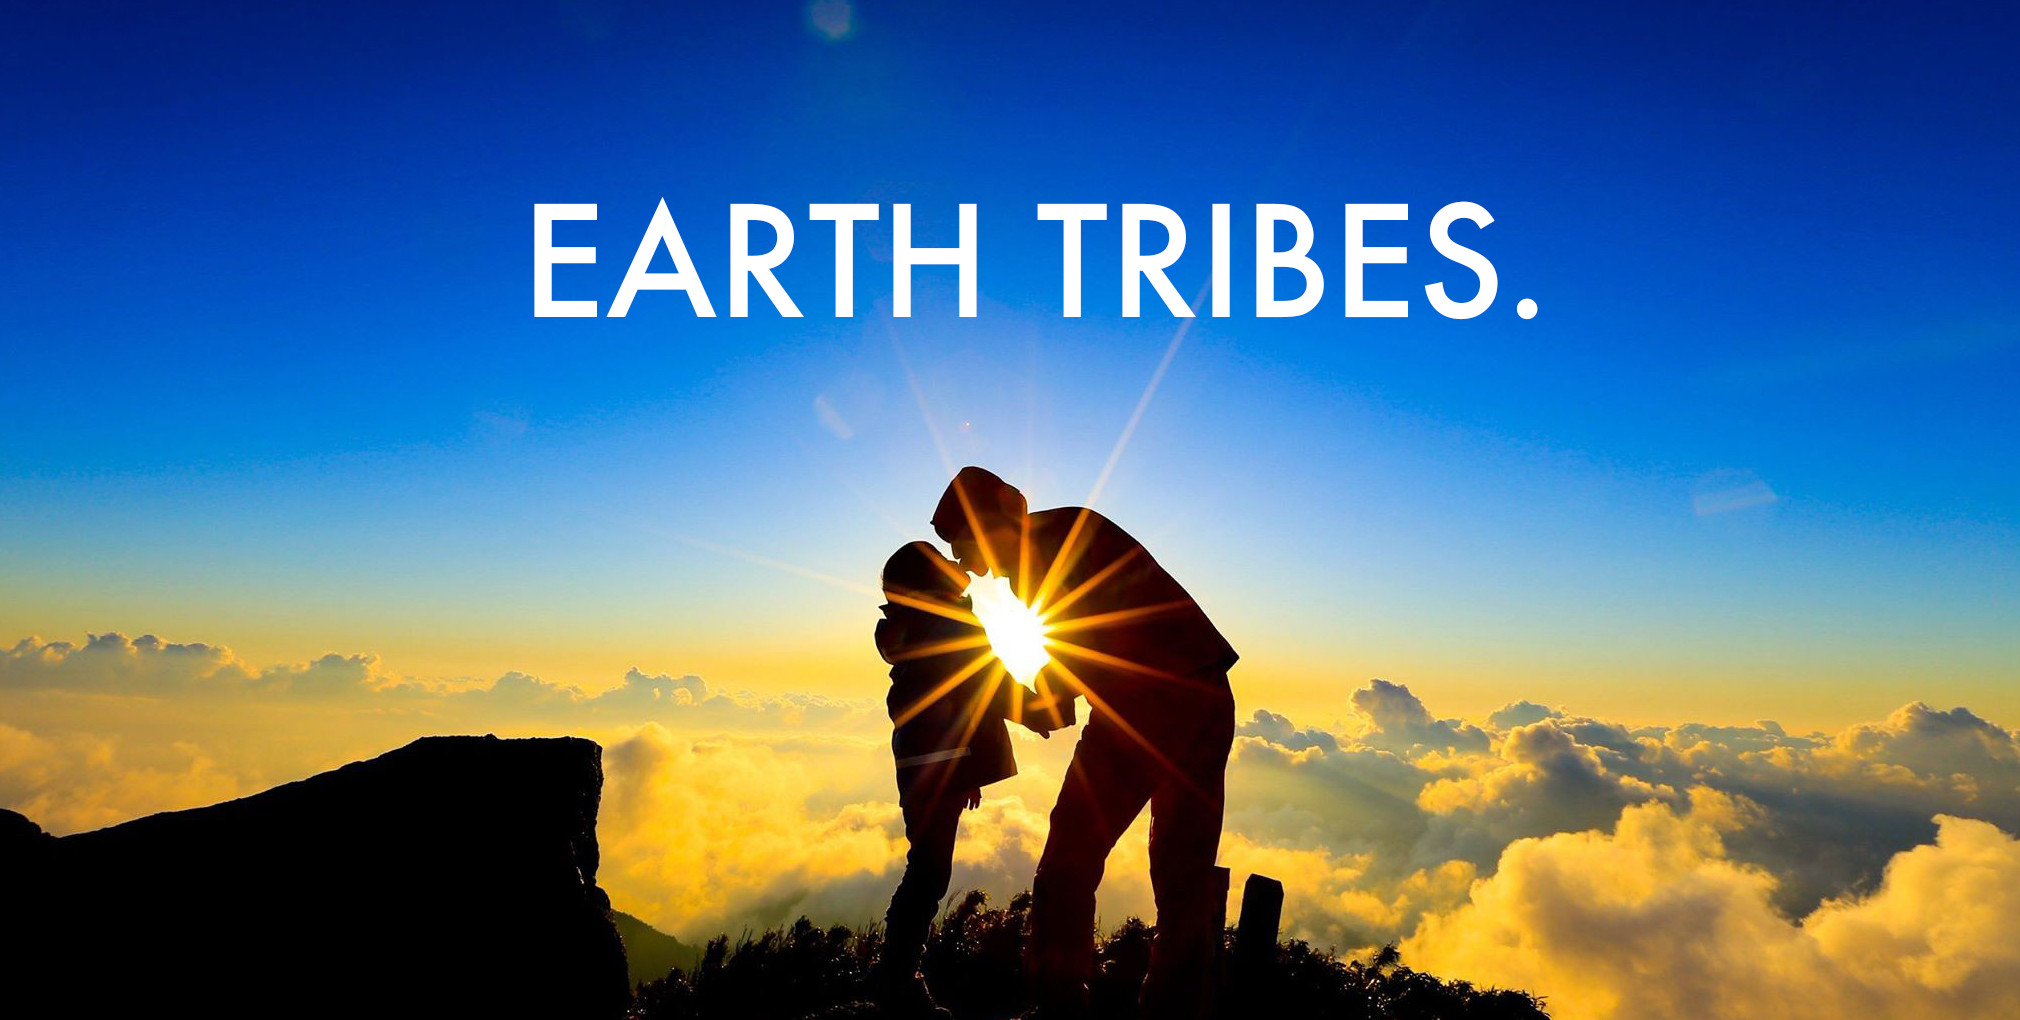 Earth tribes